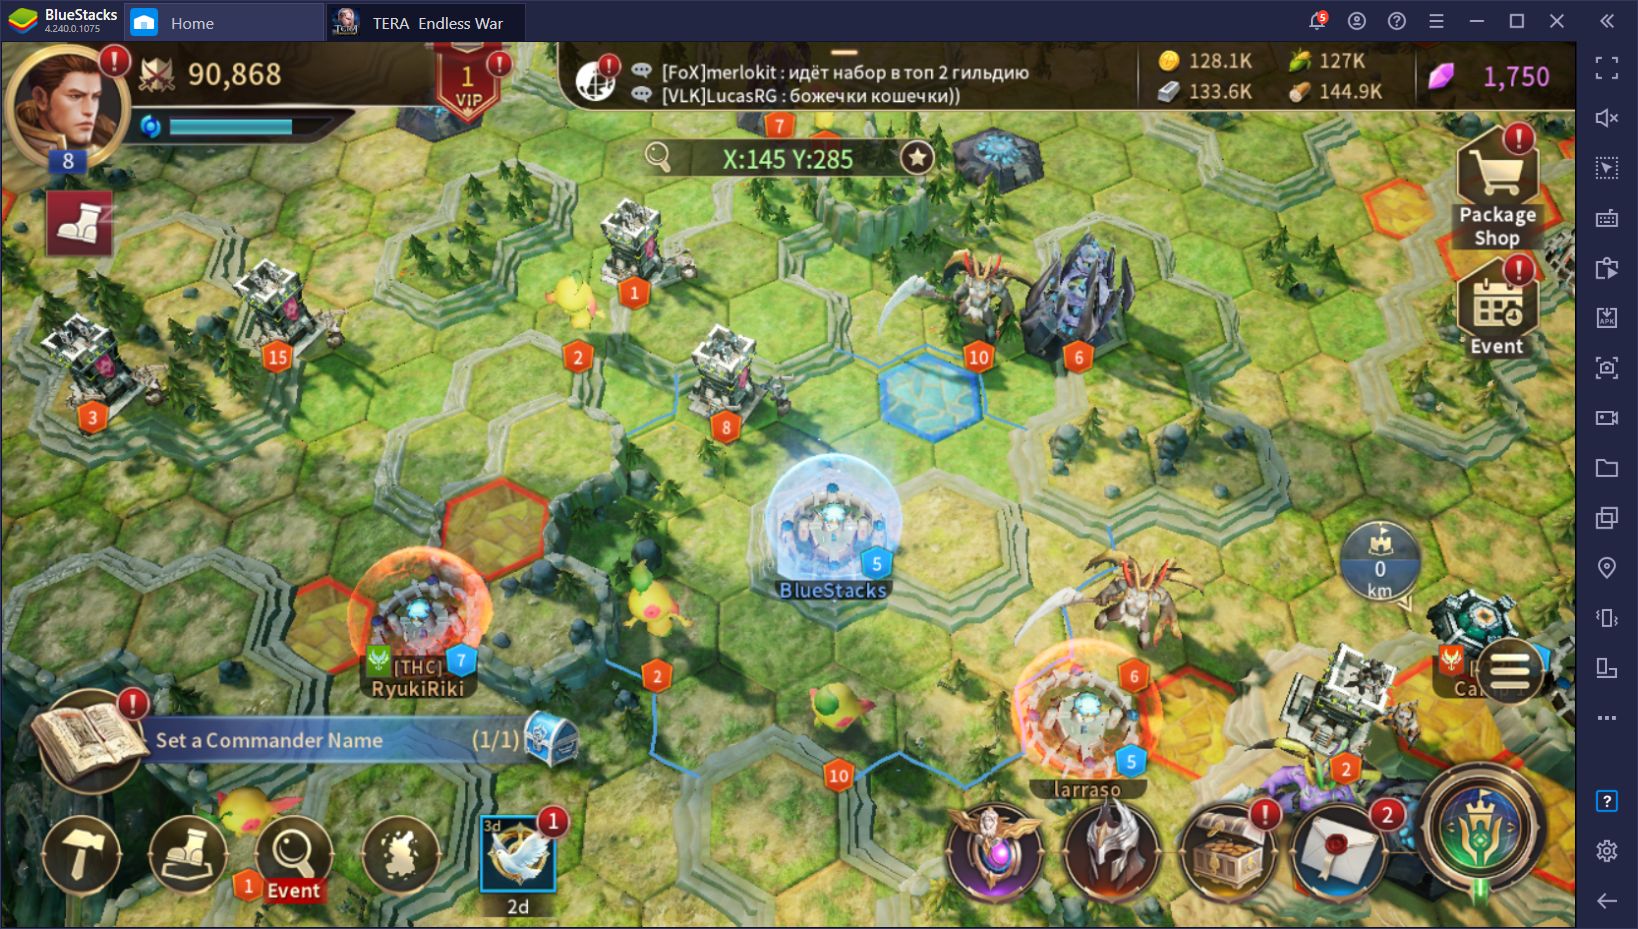 TERA: Endless War - How to Play This Mobile Game on PC With BlueStacks